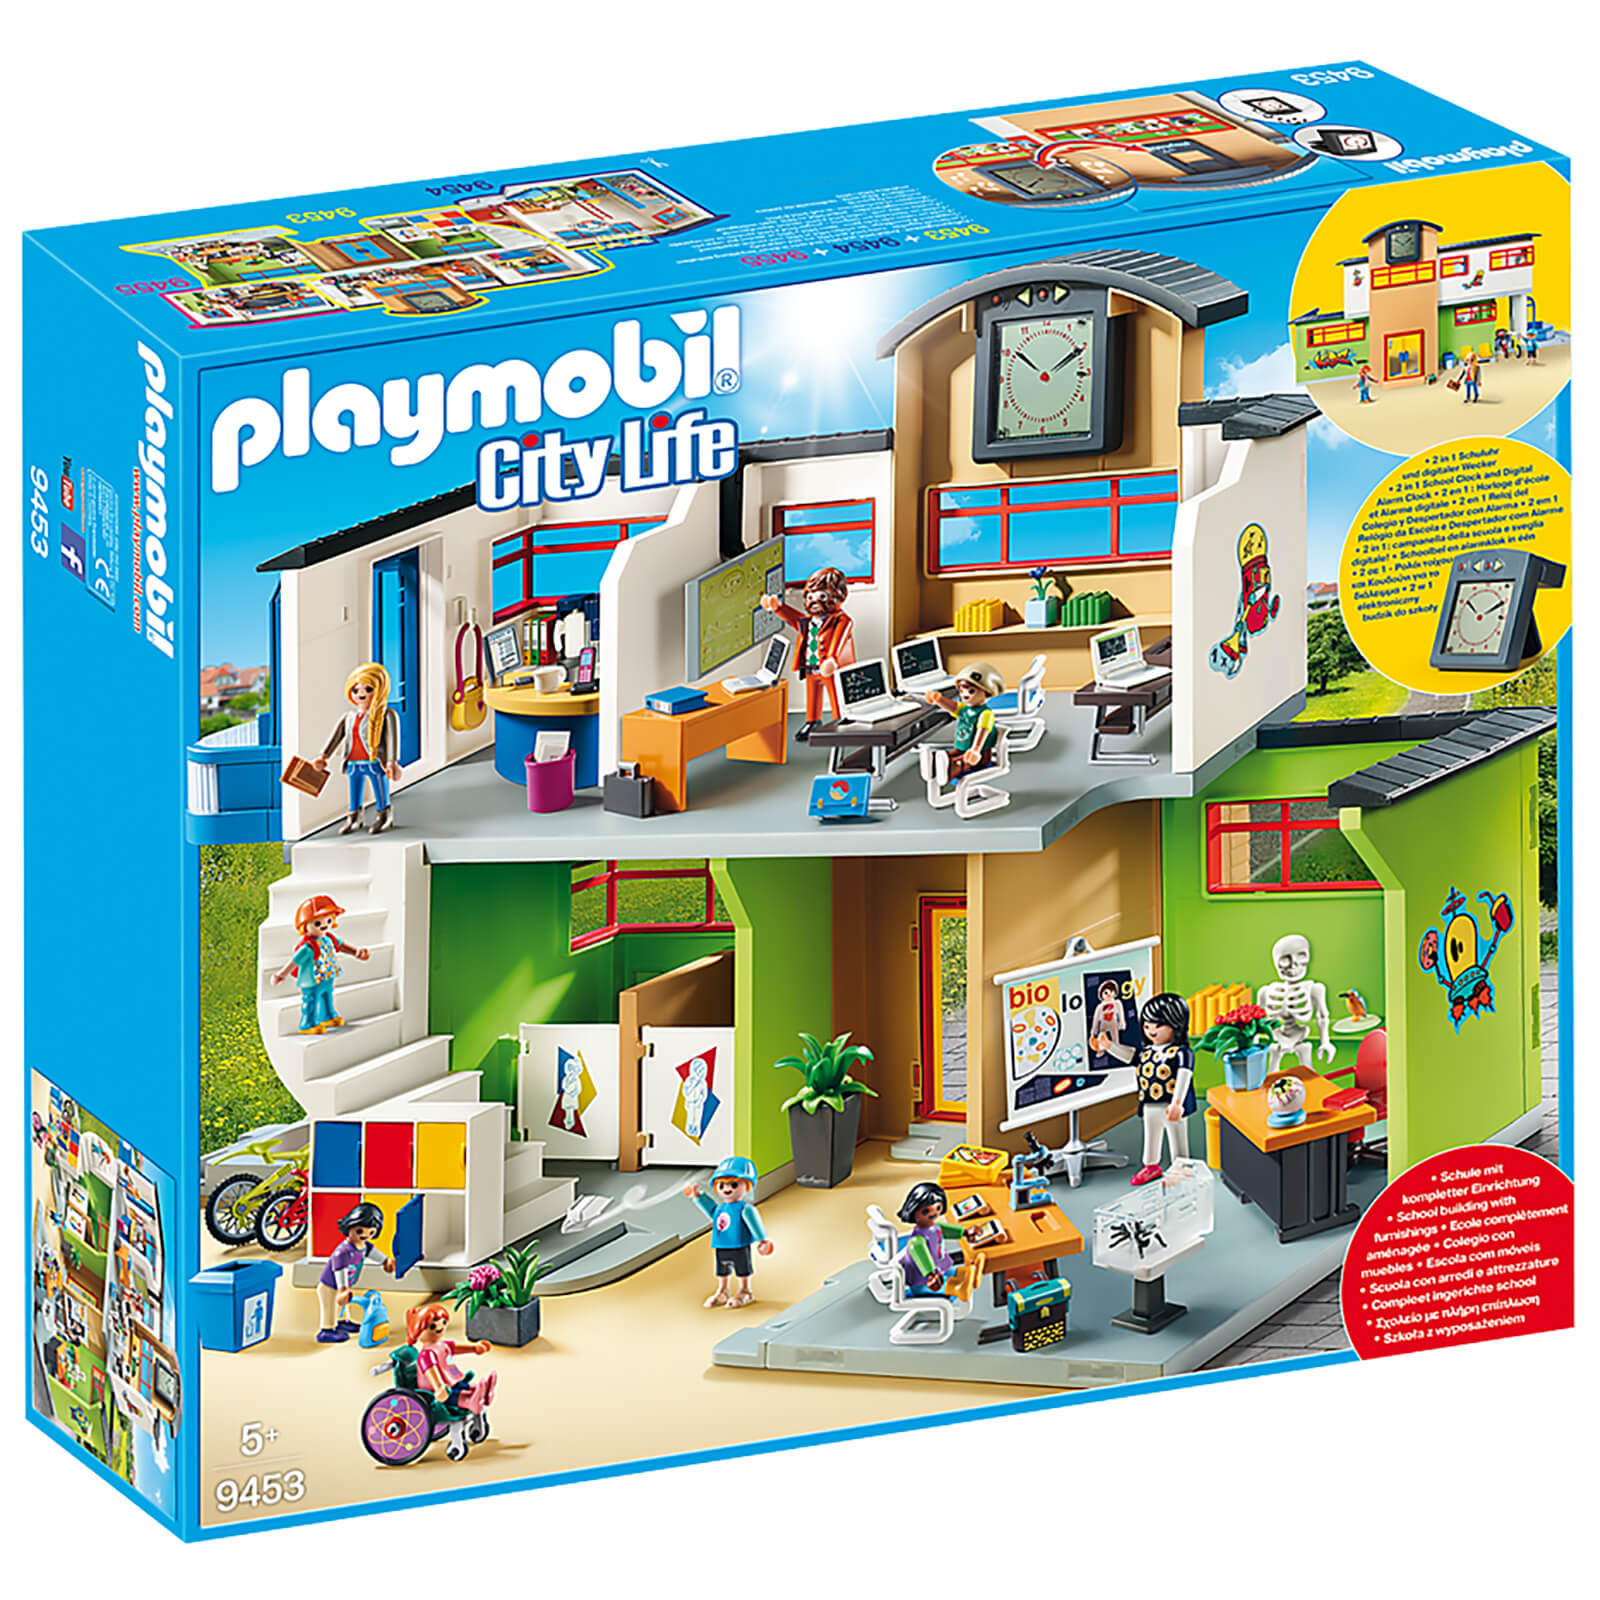 Playmobil City Life Furnished School Building With Digital Clock (9453)